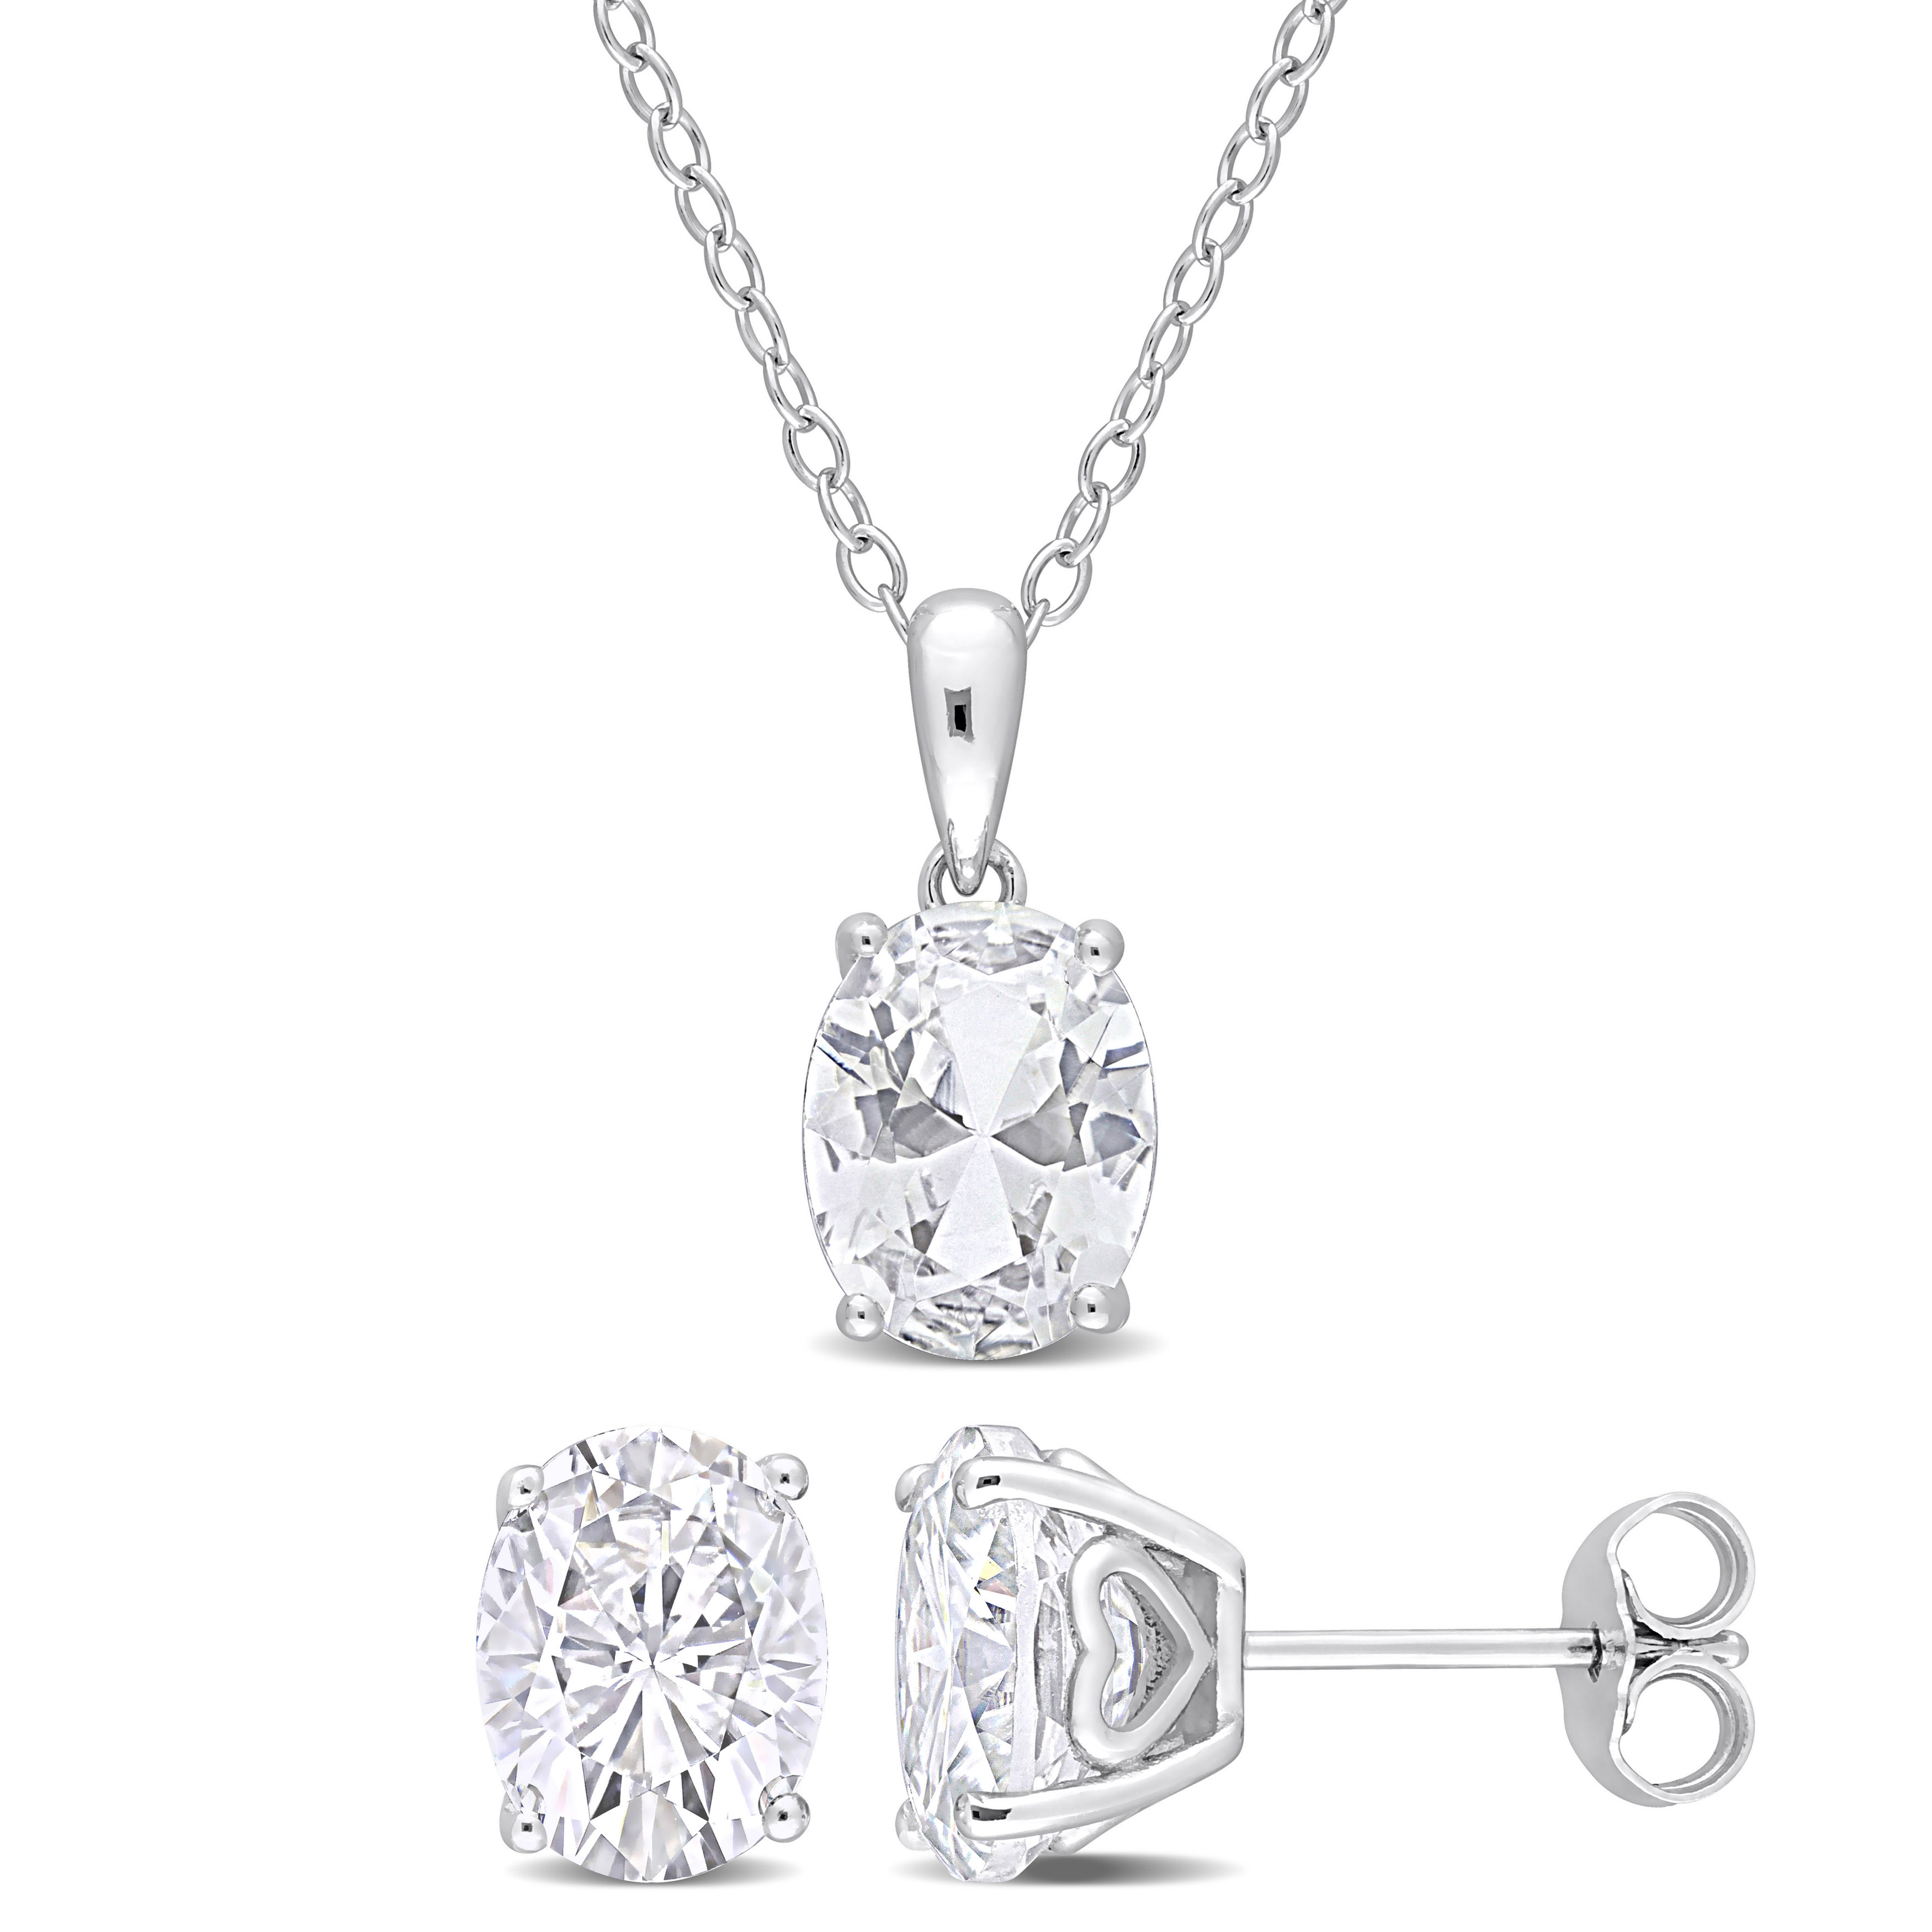 6 3/4 CT TGW Oval White Topaz 2-Piece Set of Pendant with Chain and Earrings in Sterling Silver